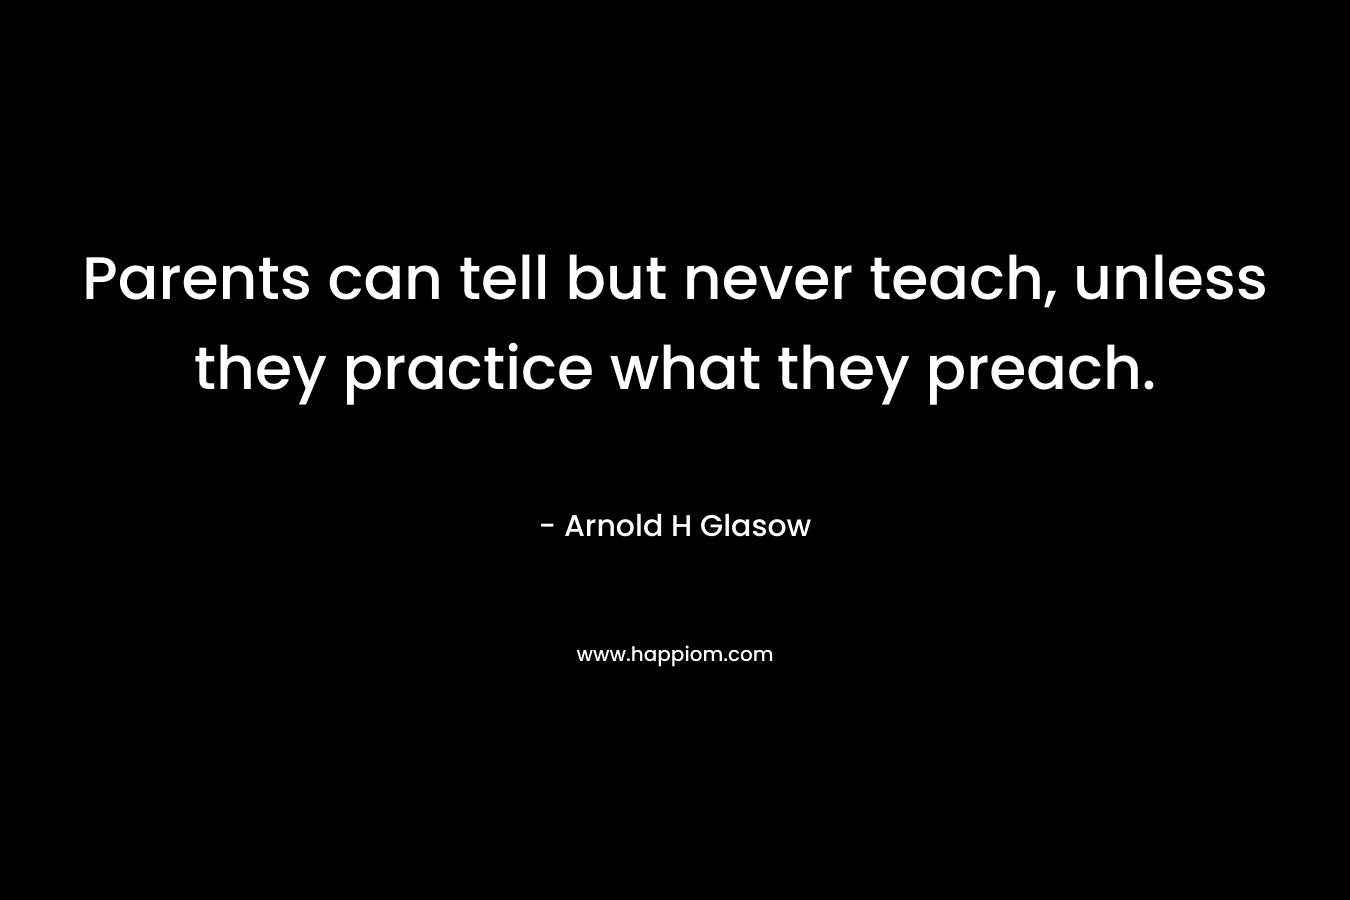 Parents can tell but never teach, unless they practice what they preach.